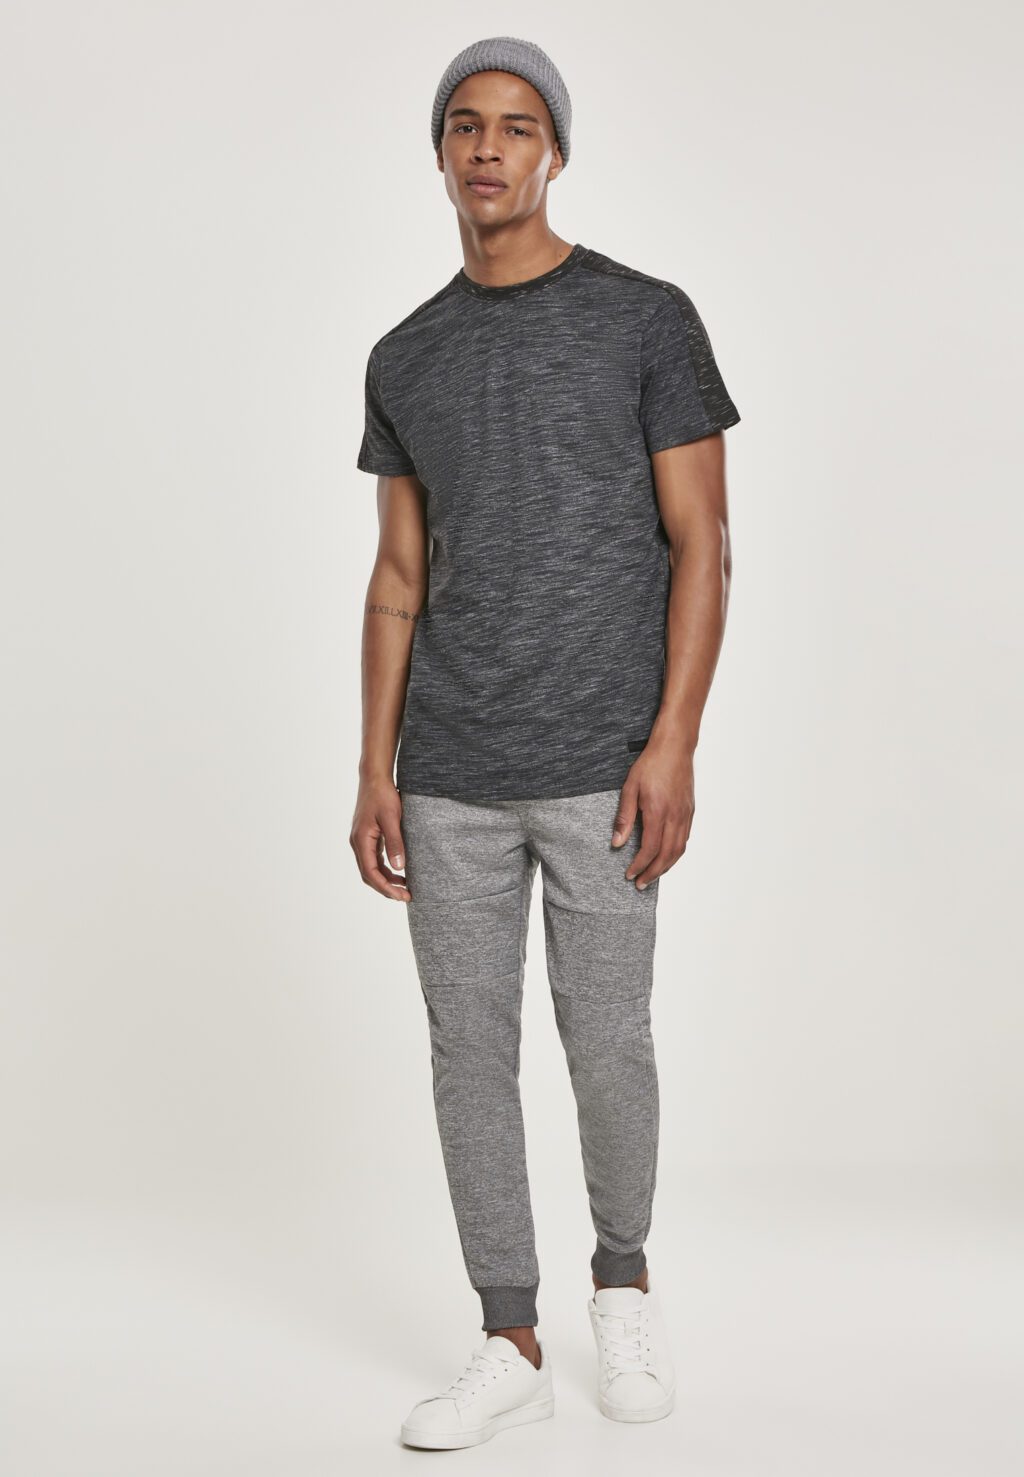 Shoulder Panel Tech Tee marled charcoal SP1412